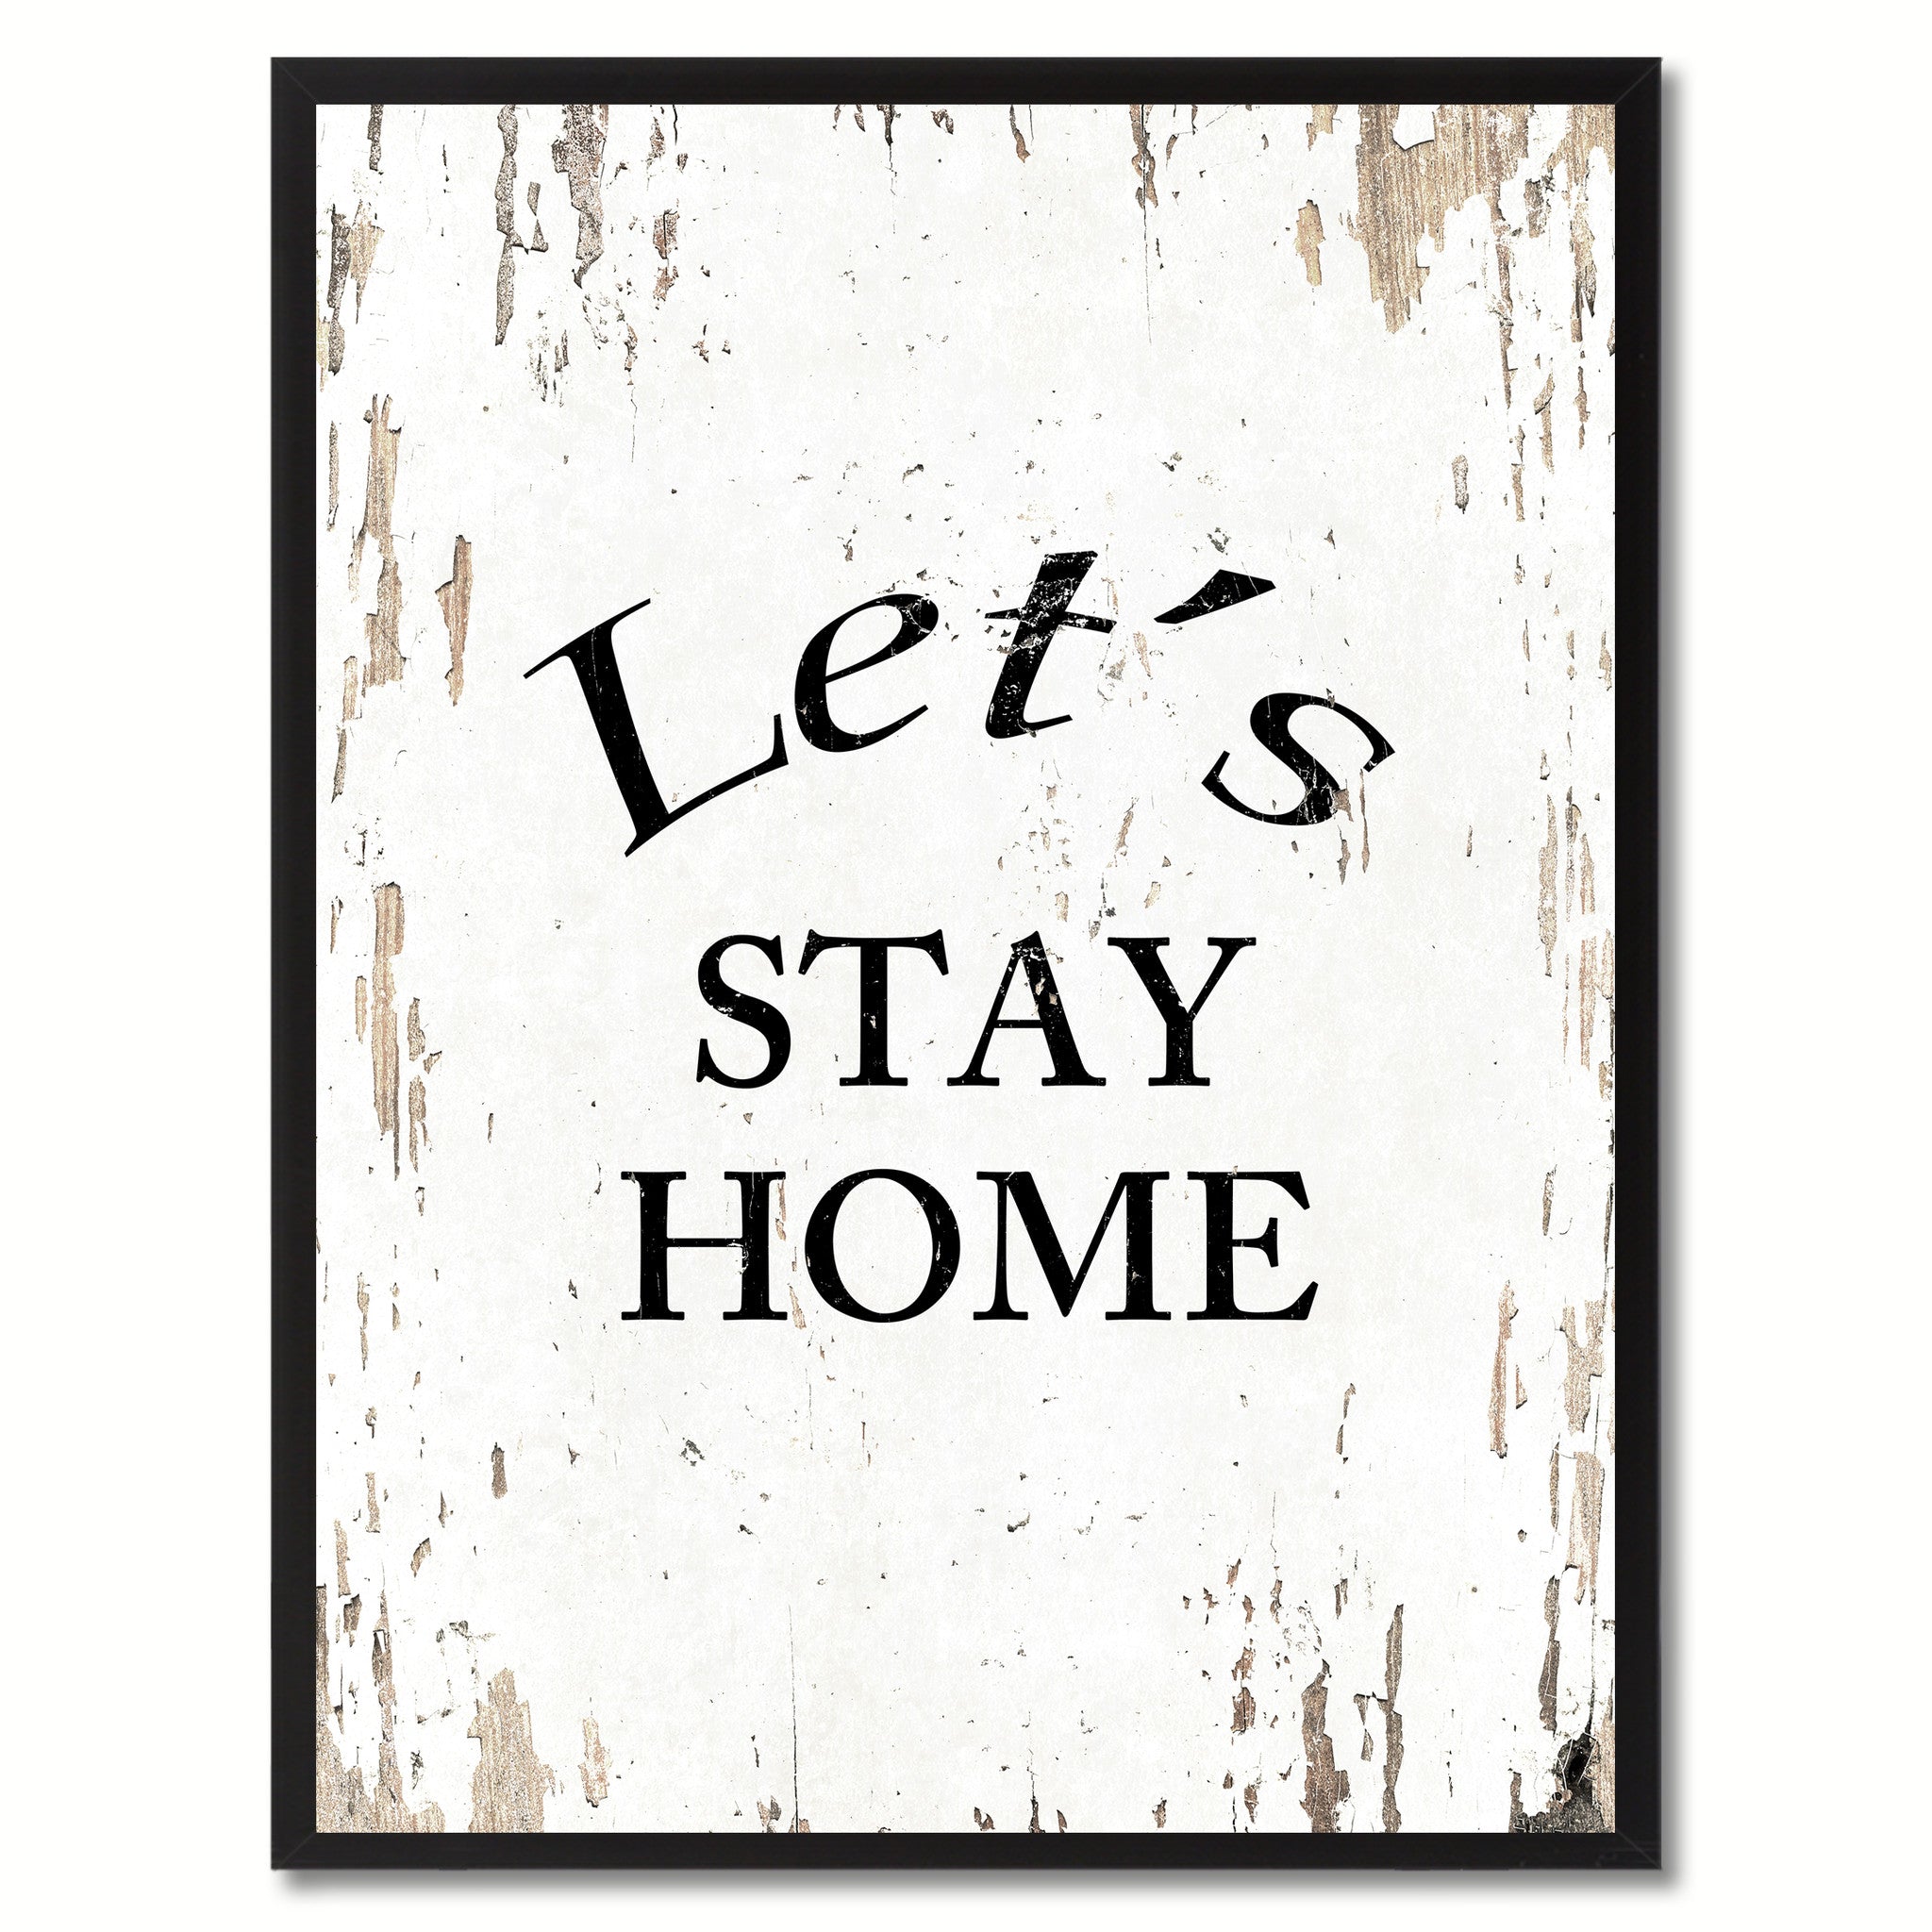 Let's Stay Home Saying Canvas Print, Black Picture Frame Home Decor Wall Art Gifts